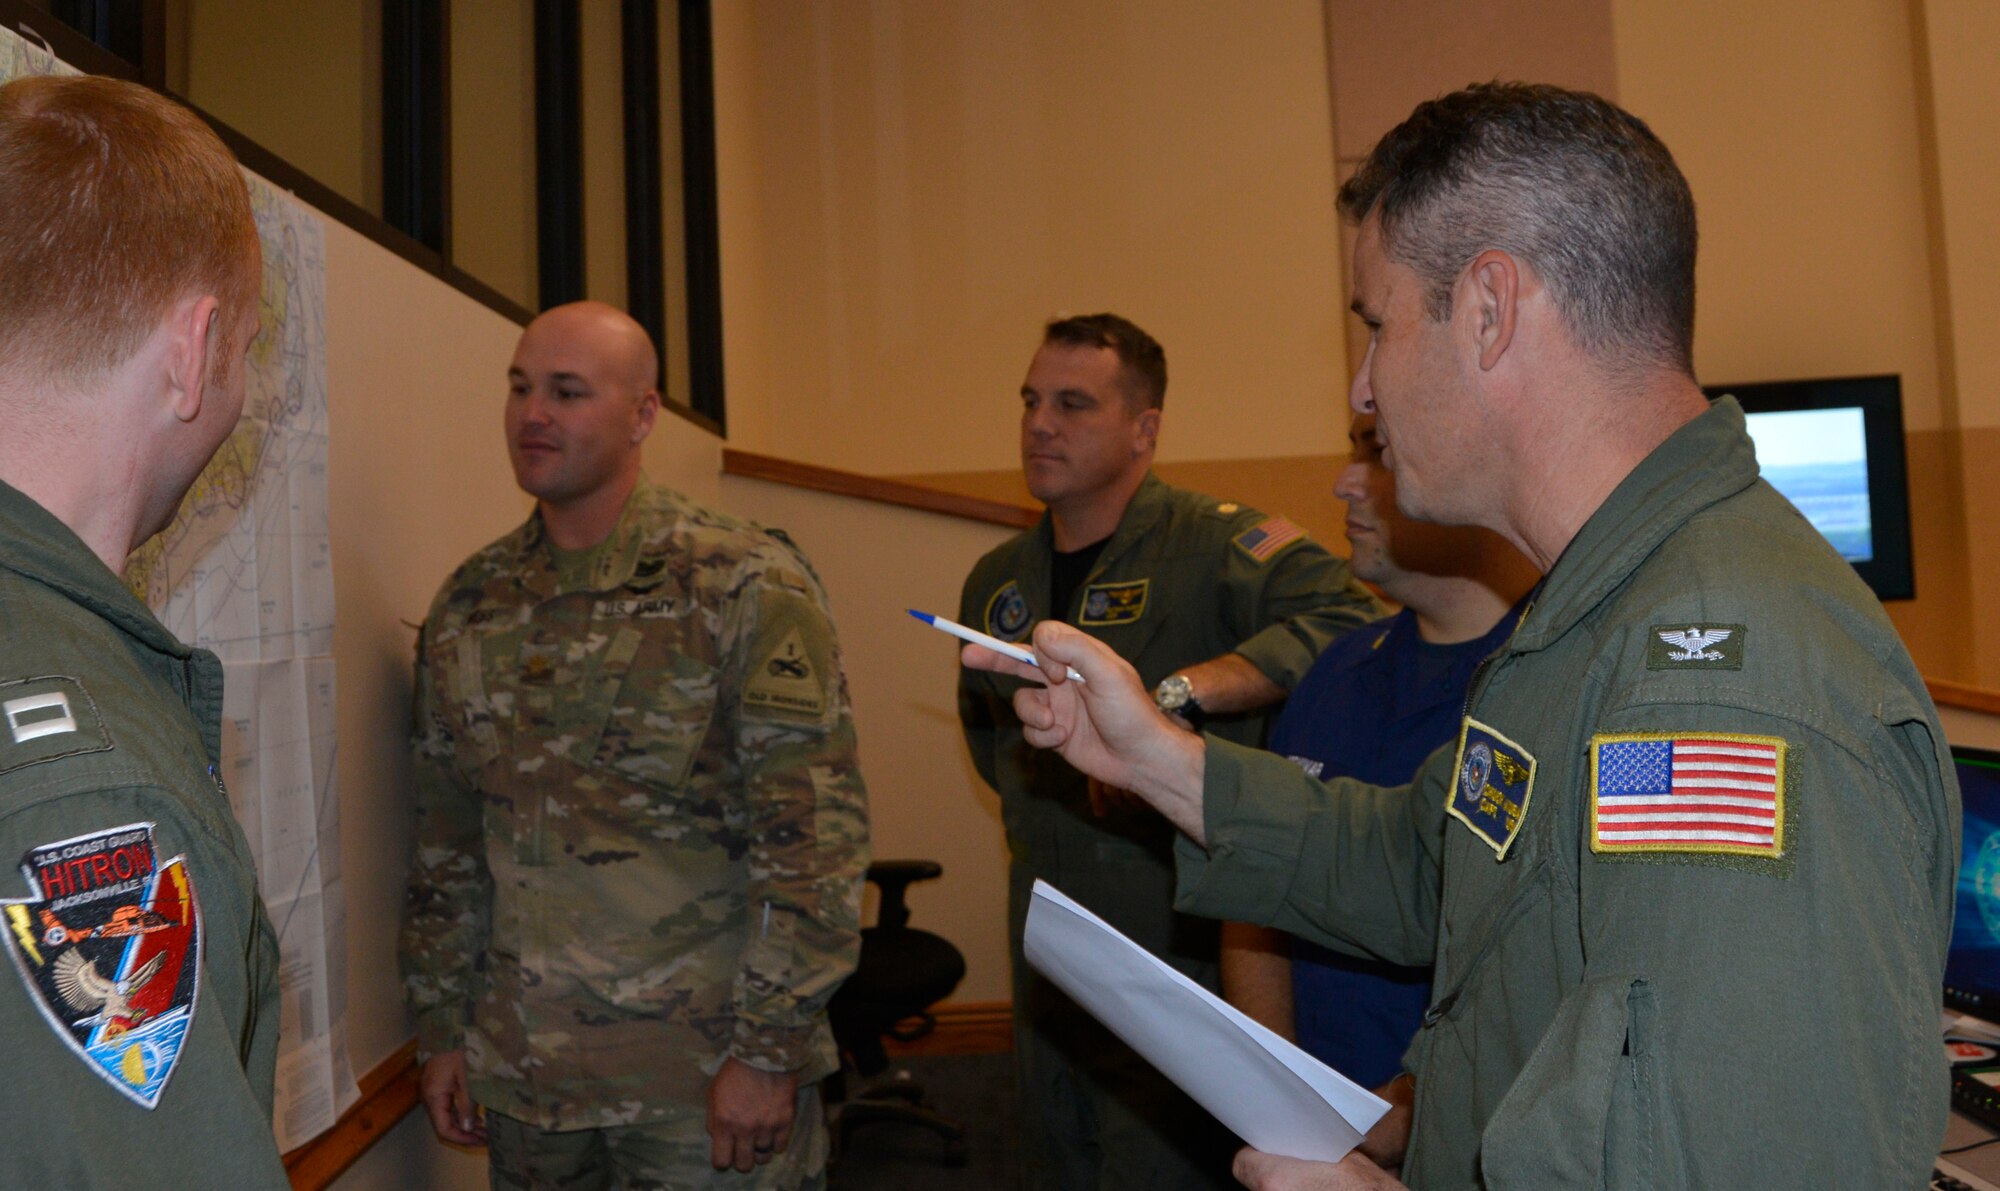 U.S. Navy CAPT. Charles Kuba, Air Forces Northern Search and Rescue Operations Coordination Element Naval Liaison Element, makes a point during a briefing about potential search and rescue operations to assist U.S. Northern Command’s support of the Federal Emergency Management Agency for Hurricane Florence. Total Force representation during AFNORTH’s  Defense Support of Civil Authorities efforts includes active-duty U.S. Navy, U.S. Marine Corps, U.S. Army, U.S. Coast Guard, and U.S. Air Force, Guard, Reservists and civilians. (Air Force photo by Mary McHale)